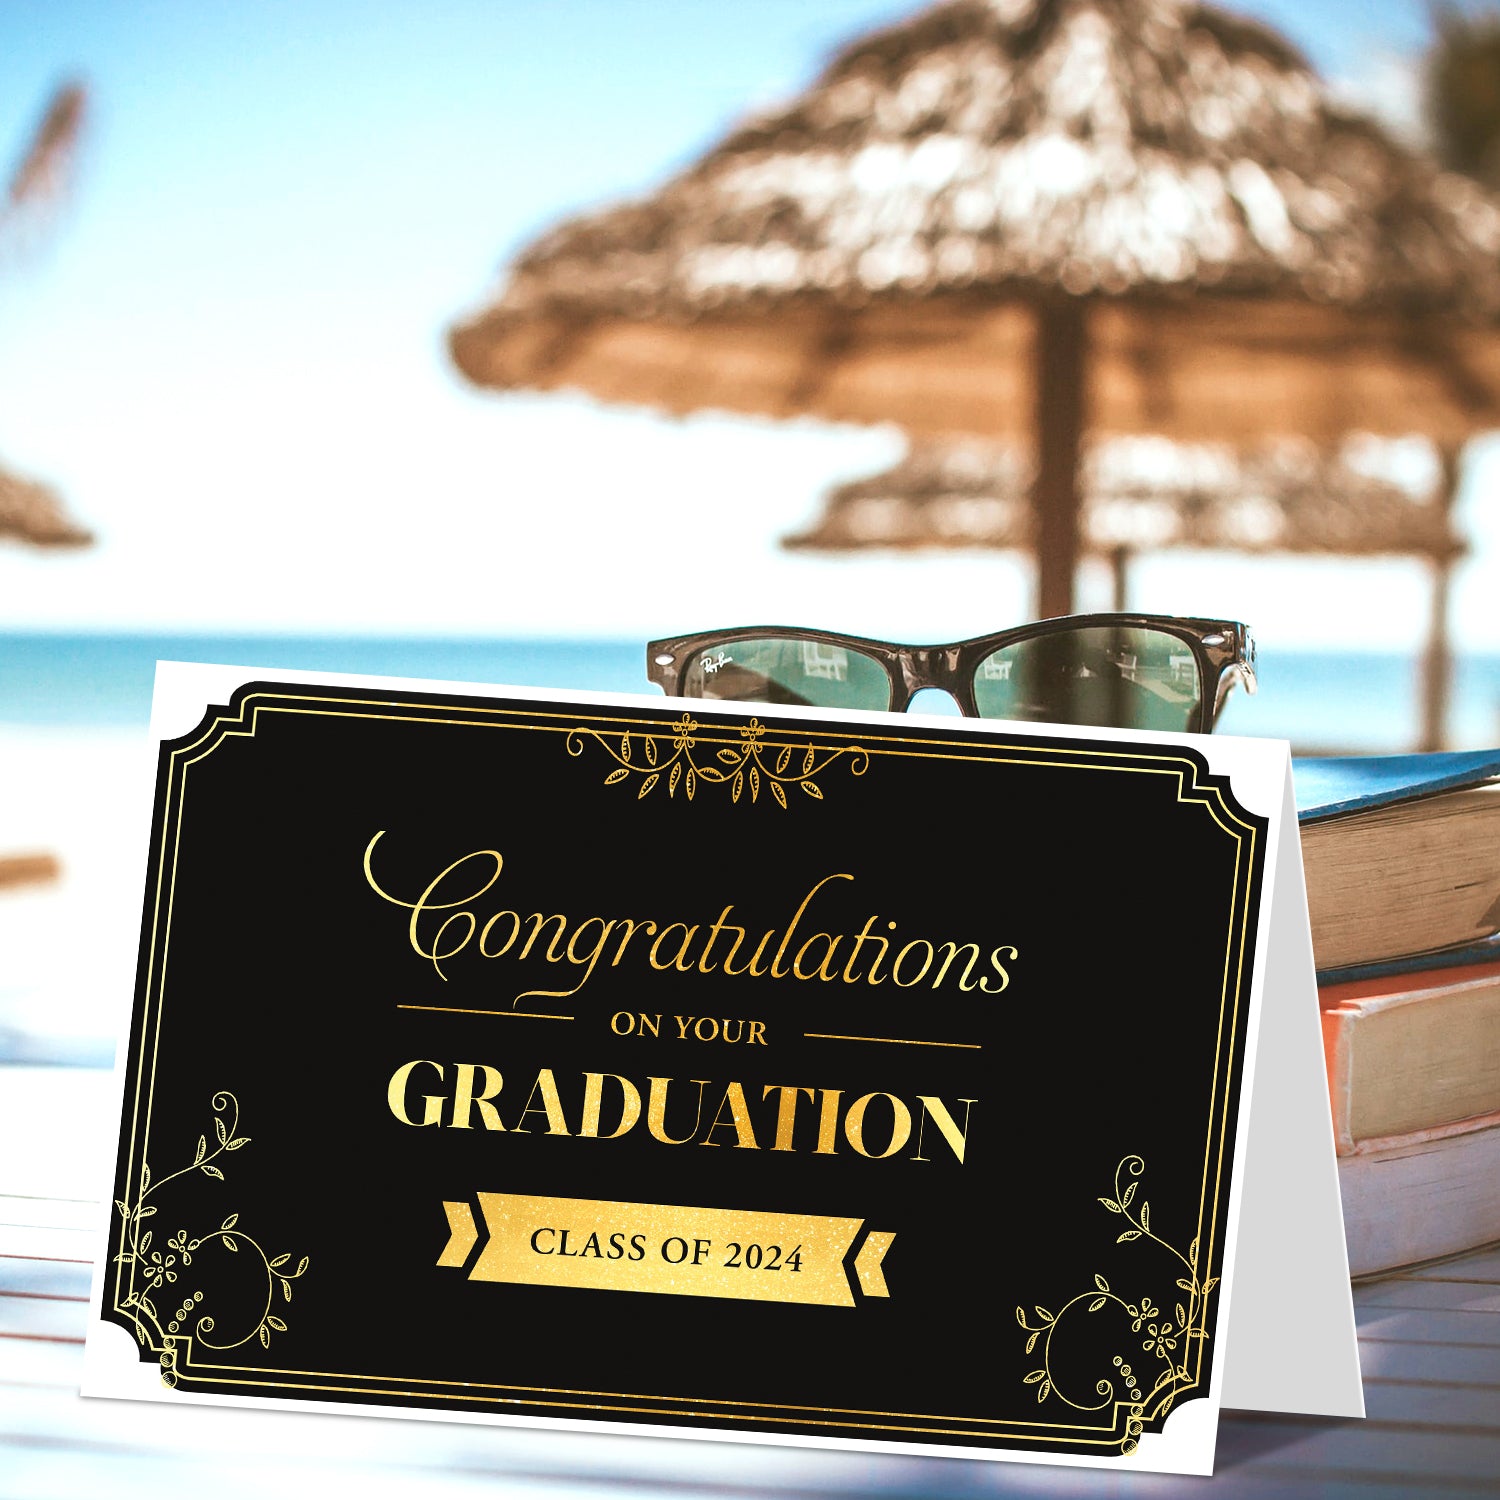 Elegant and Classic Graduation Greeting Card - Congratulations on Your Graduation, Class of 2024